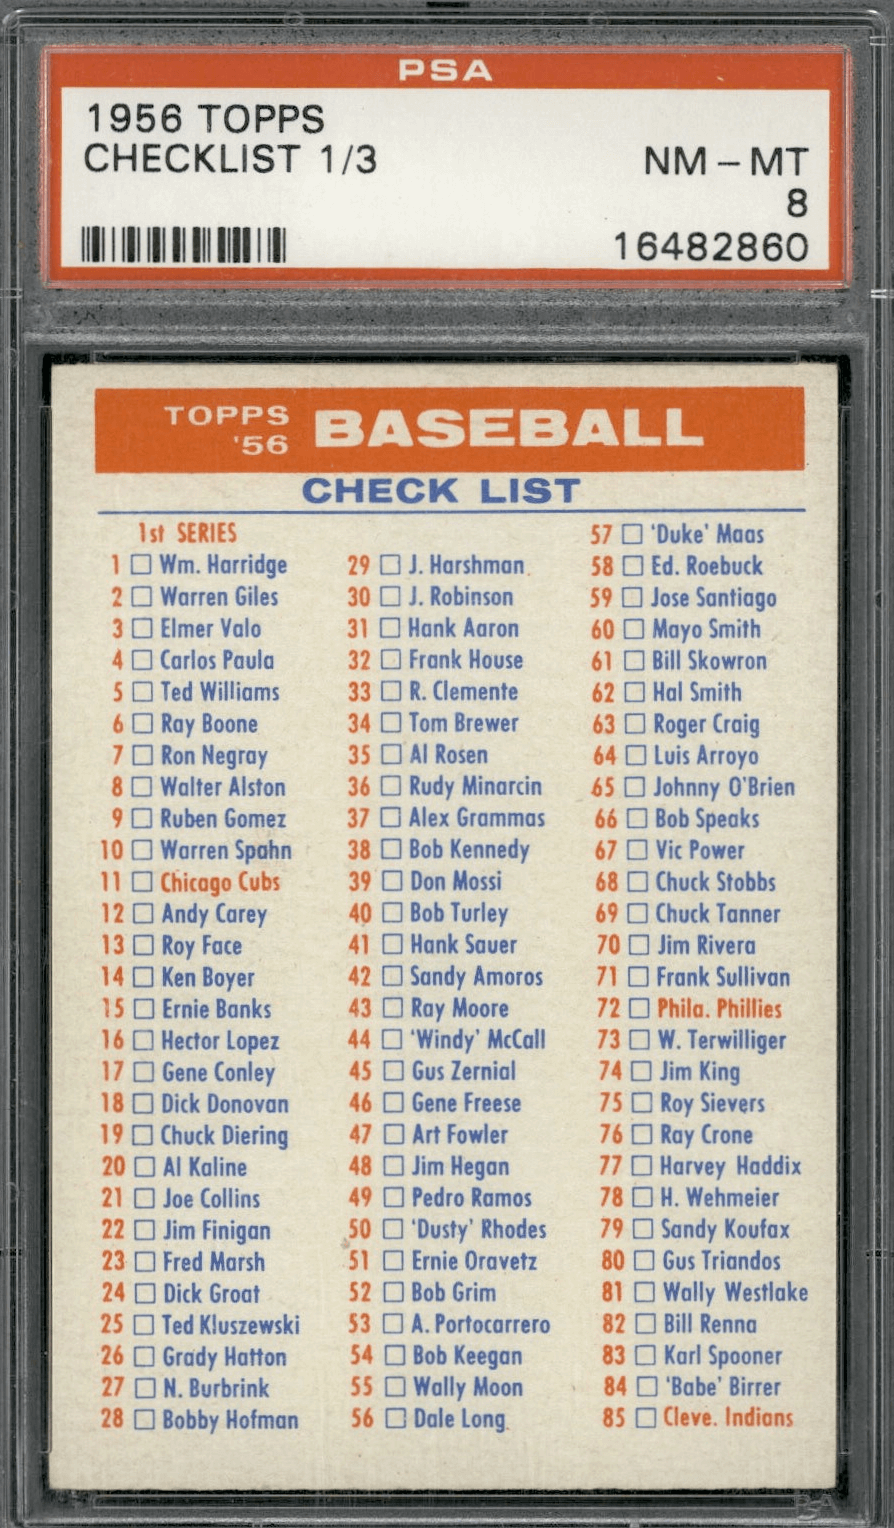 1 1968 topps ind 1998 Temph